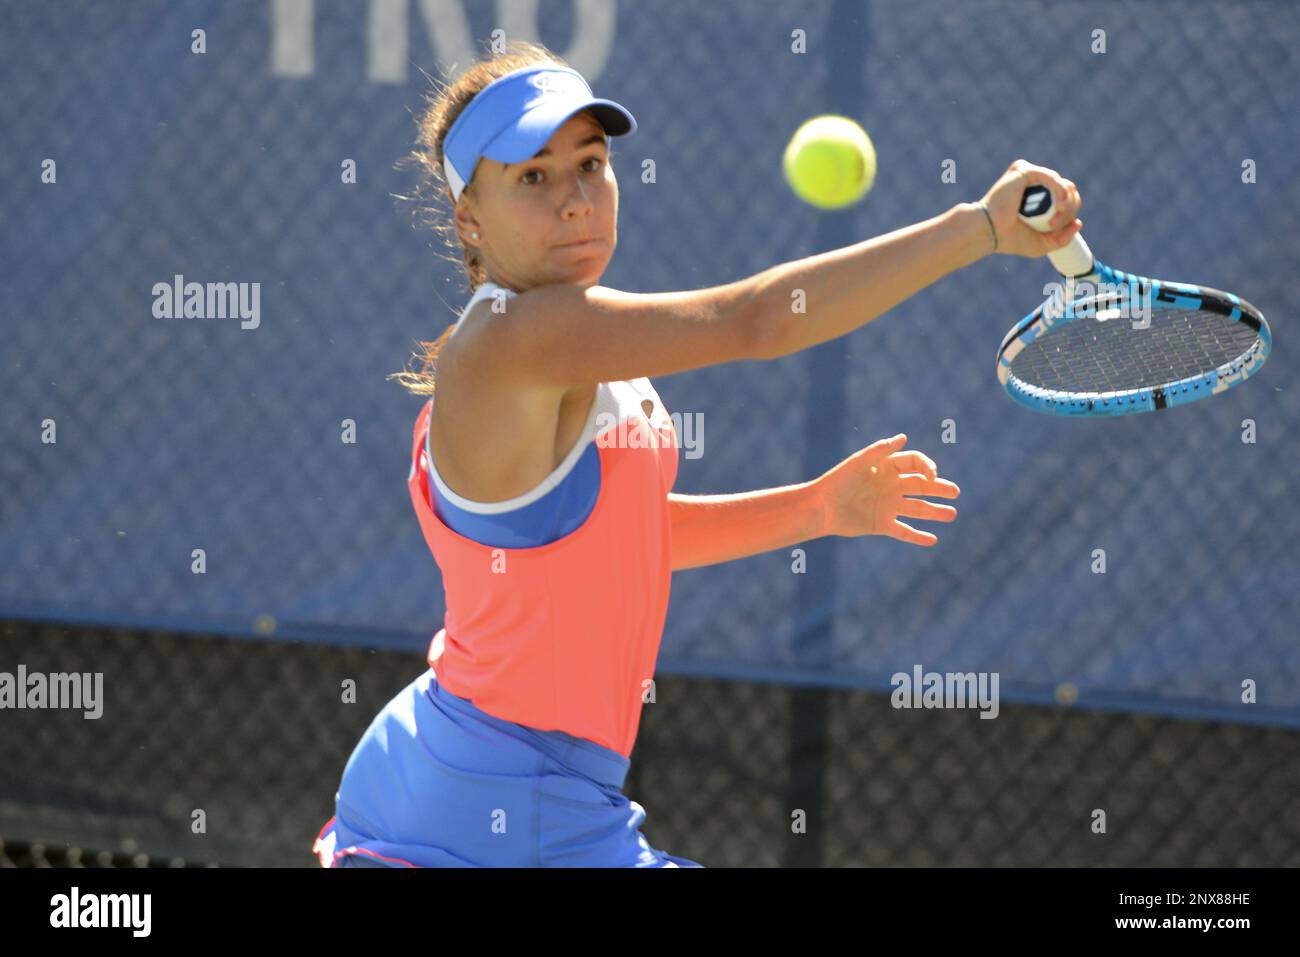 April 26, 2018 - Charlottesville, Virginia, United States - IRINA MARIA BARA  of Romania in her first round match in the Boyd Tinsley Clay Court Classic  tennis tournament in Charlottesville Virginia. (Credit